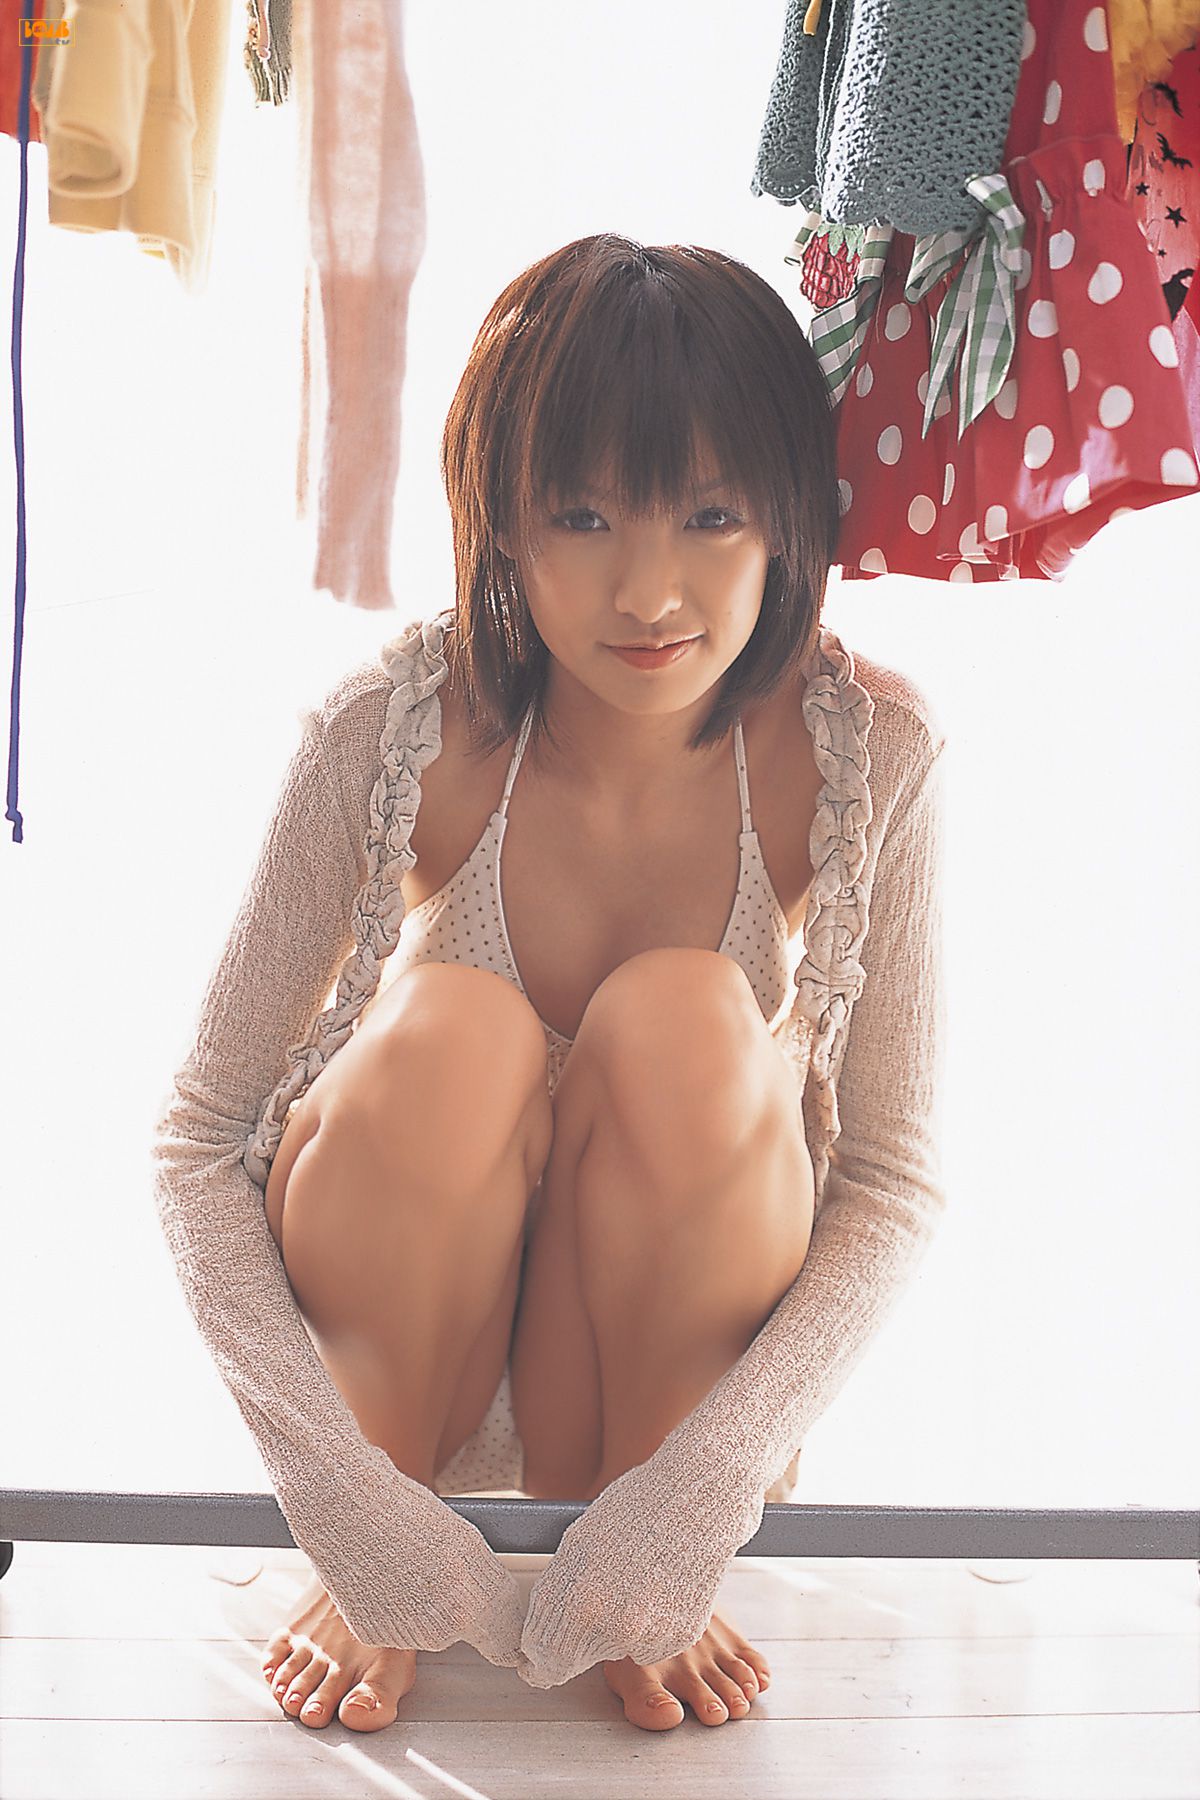 [Bomb.TV] The March 2008 issue of Akina Minami Page 40 No.402ef5